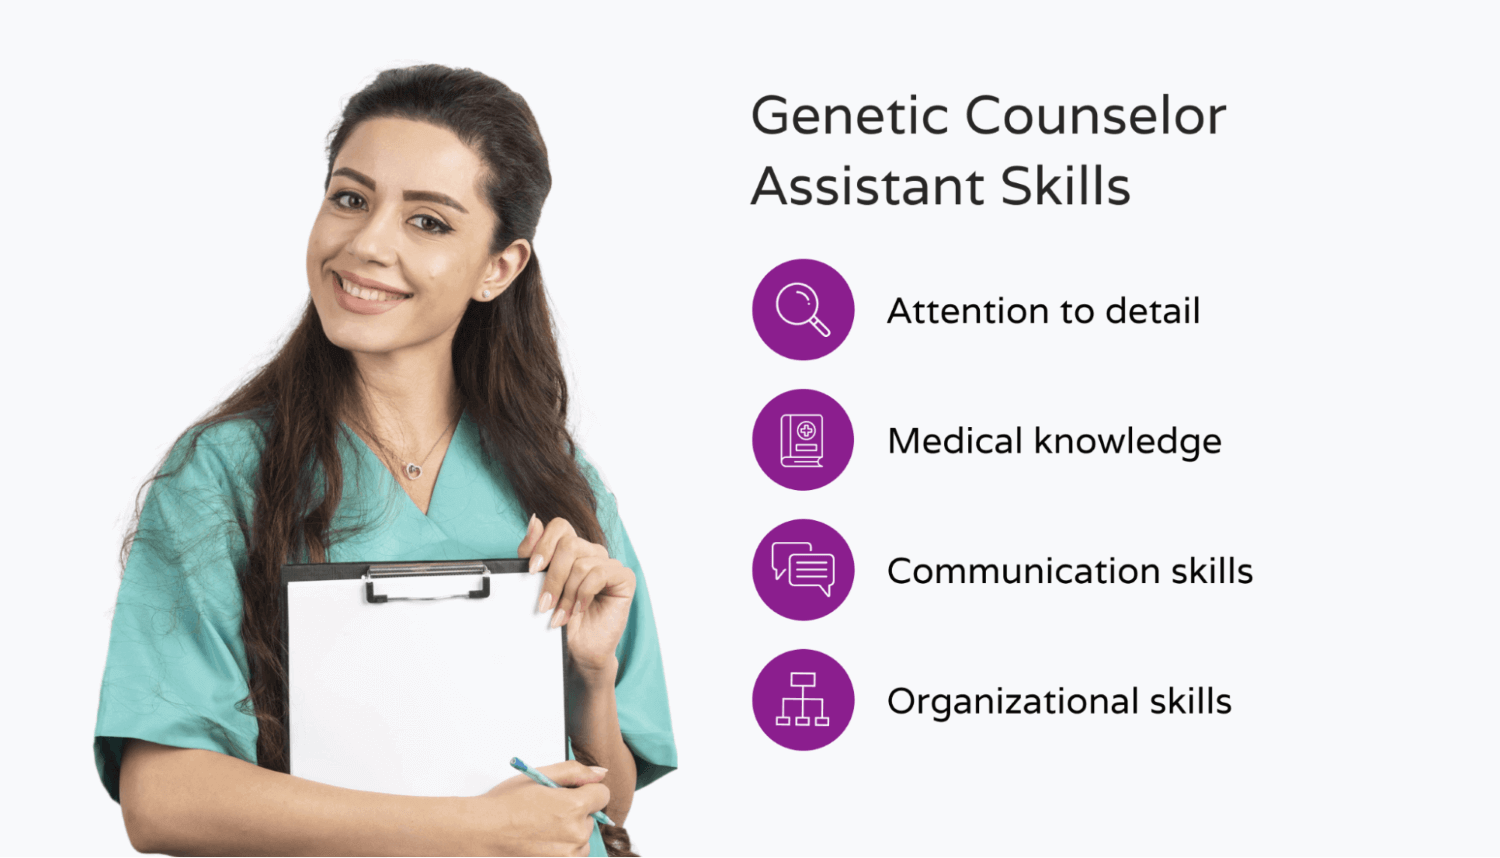 The top genetic counselor assistant skills